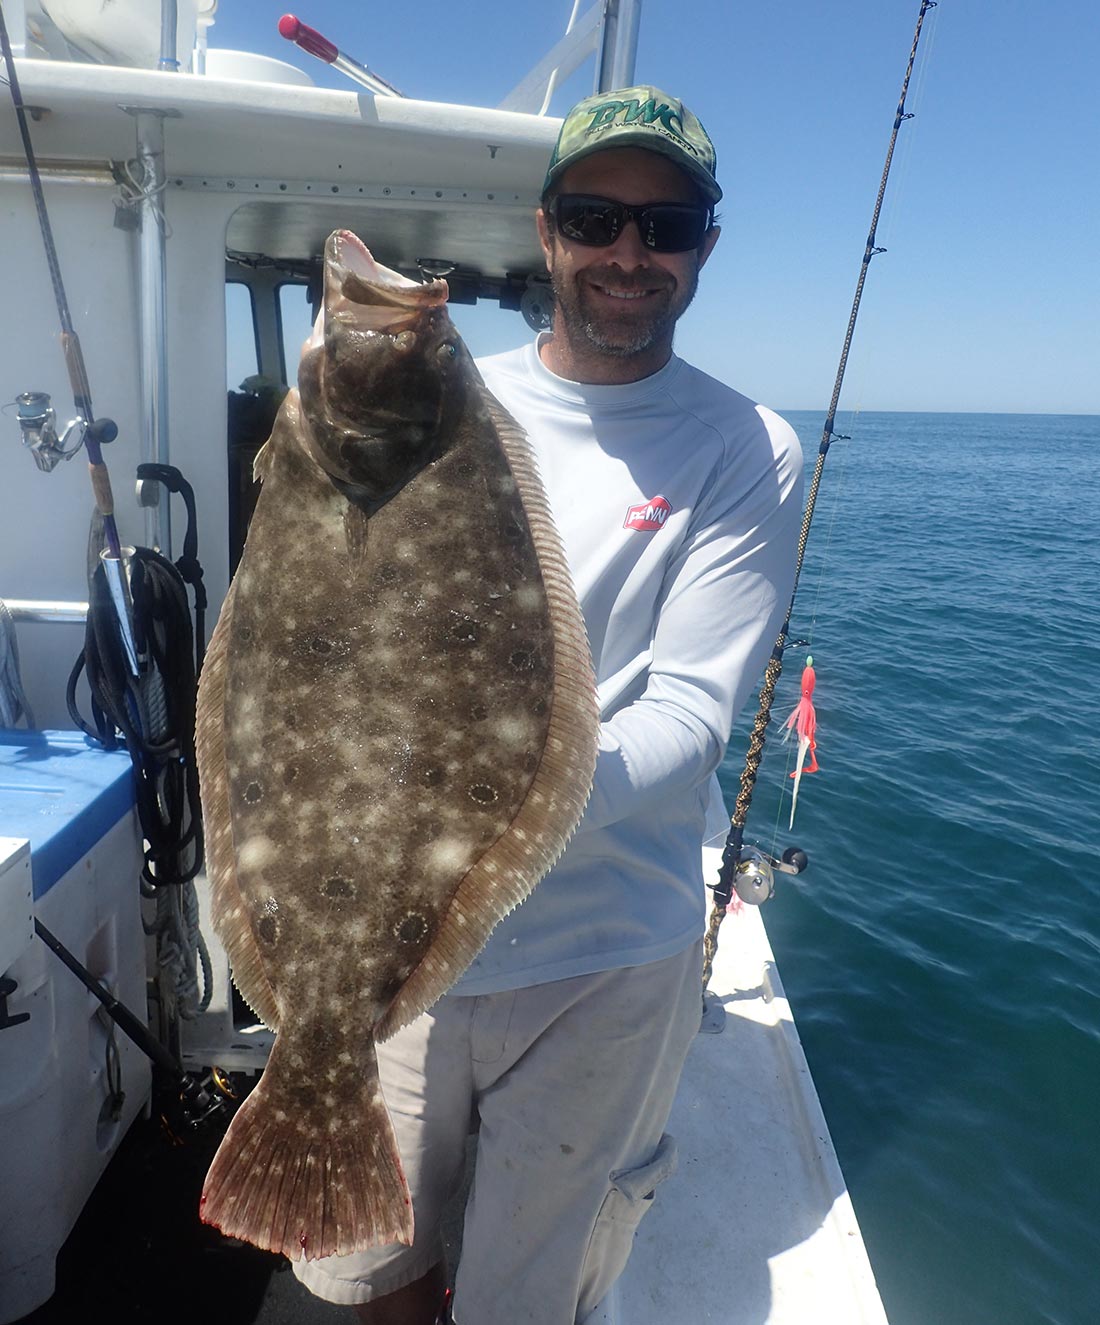 The author with an 11.5-pound fluke 